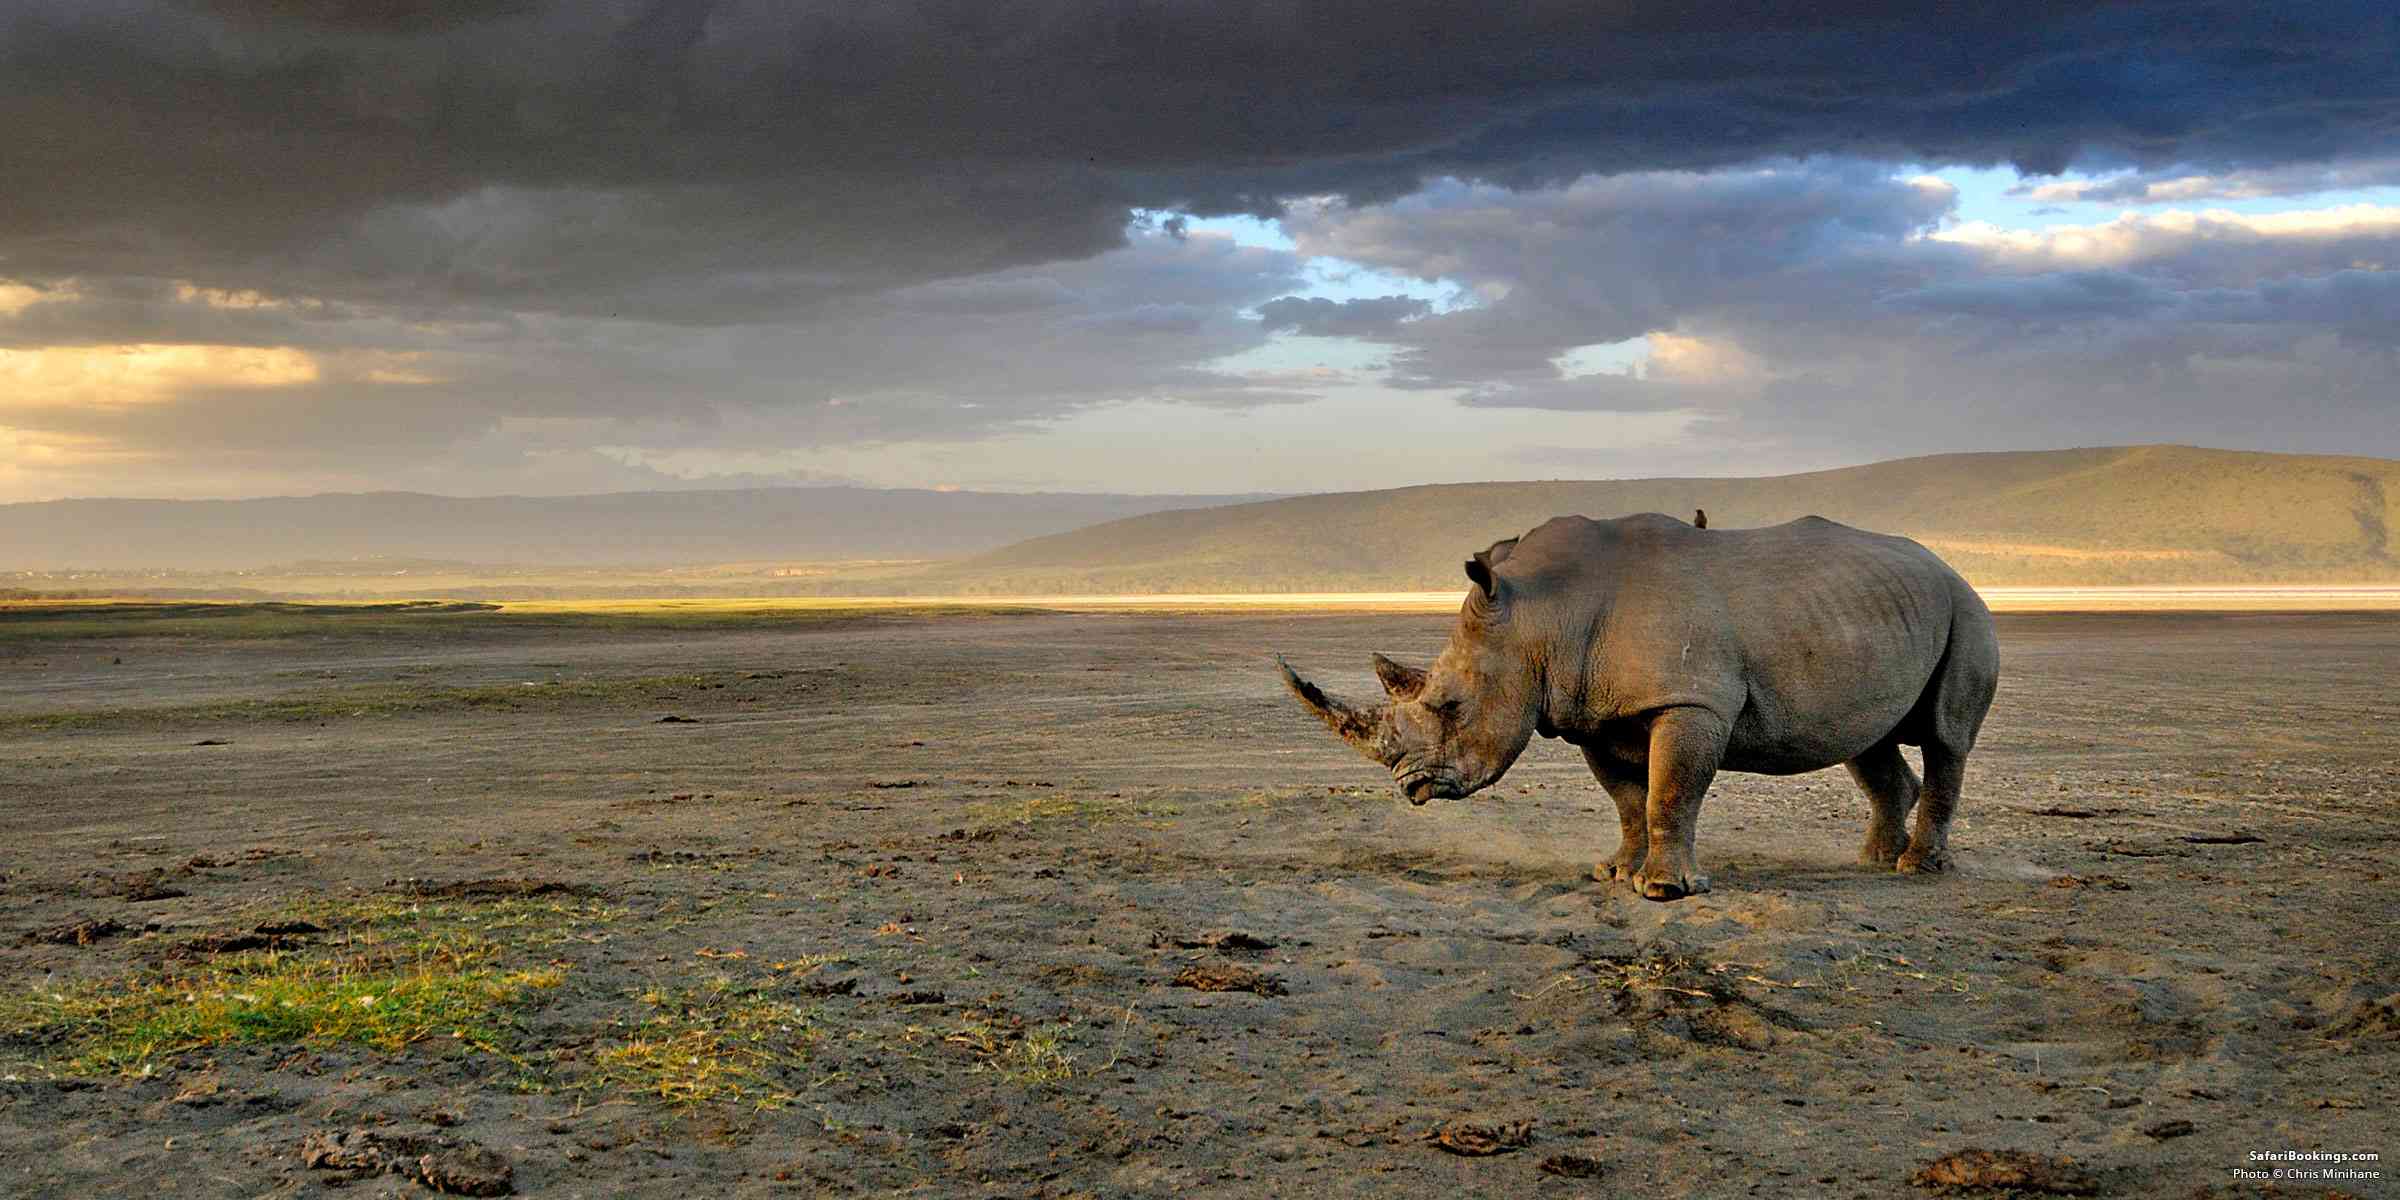 5 Fascinating Facts About the Black Rhino (Diceros Bicornis)